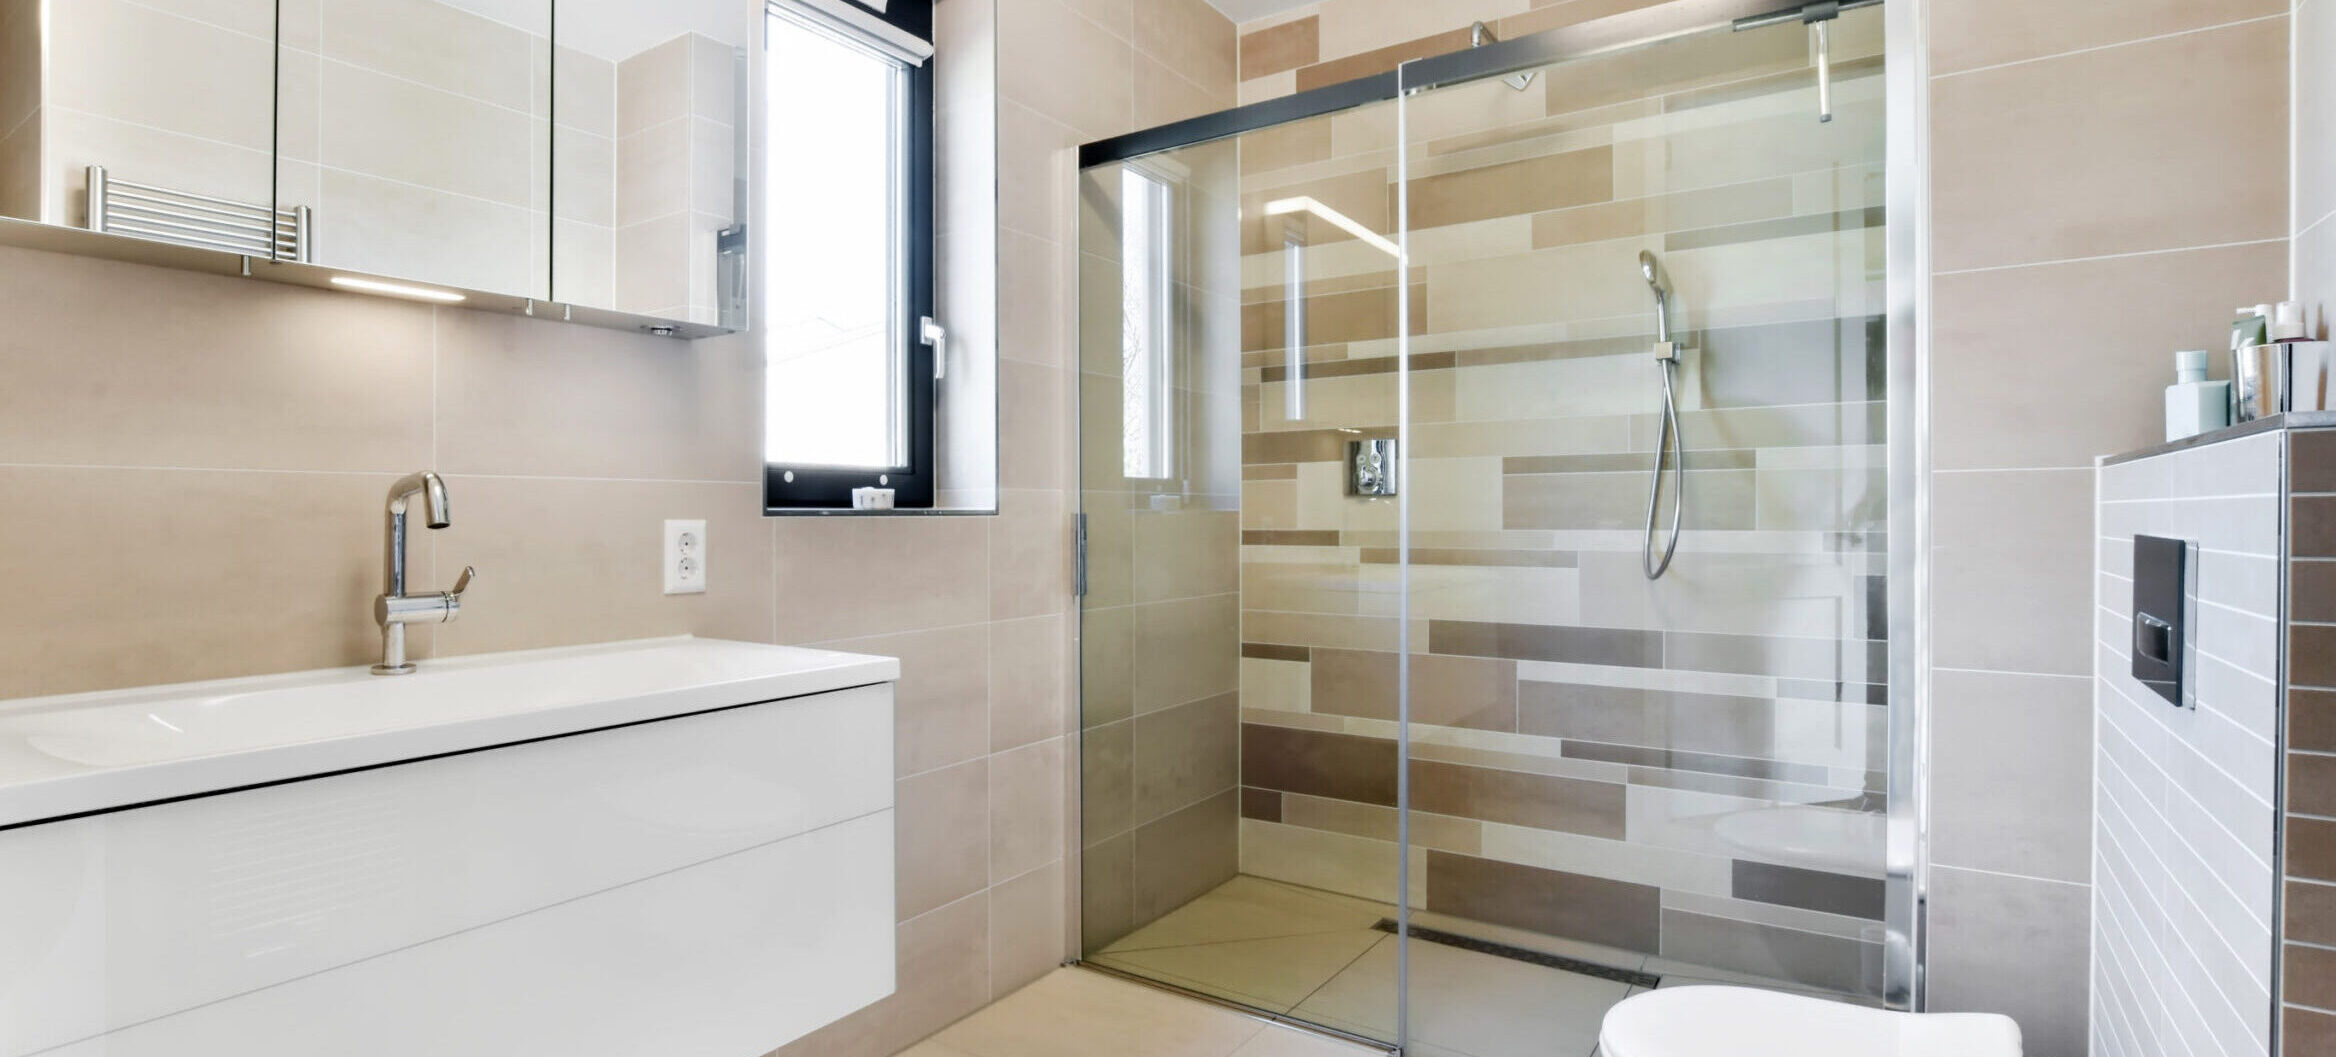 Modernized bathroom with a glass shower and unusual multi-colored tiles on the walls